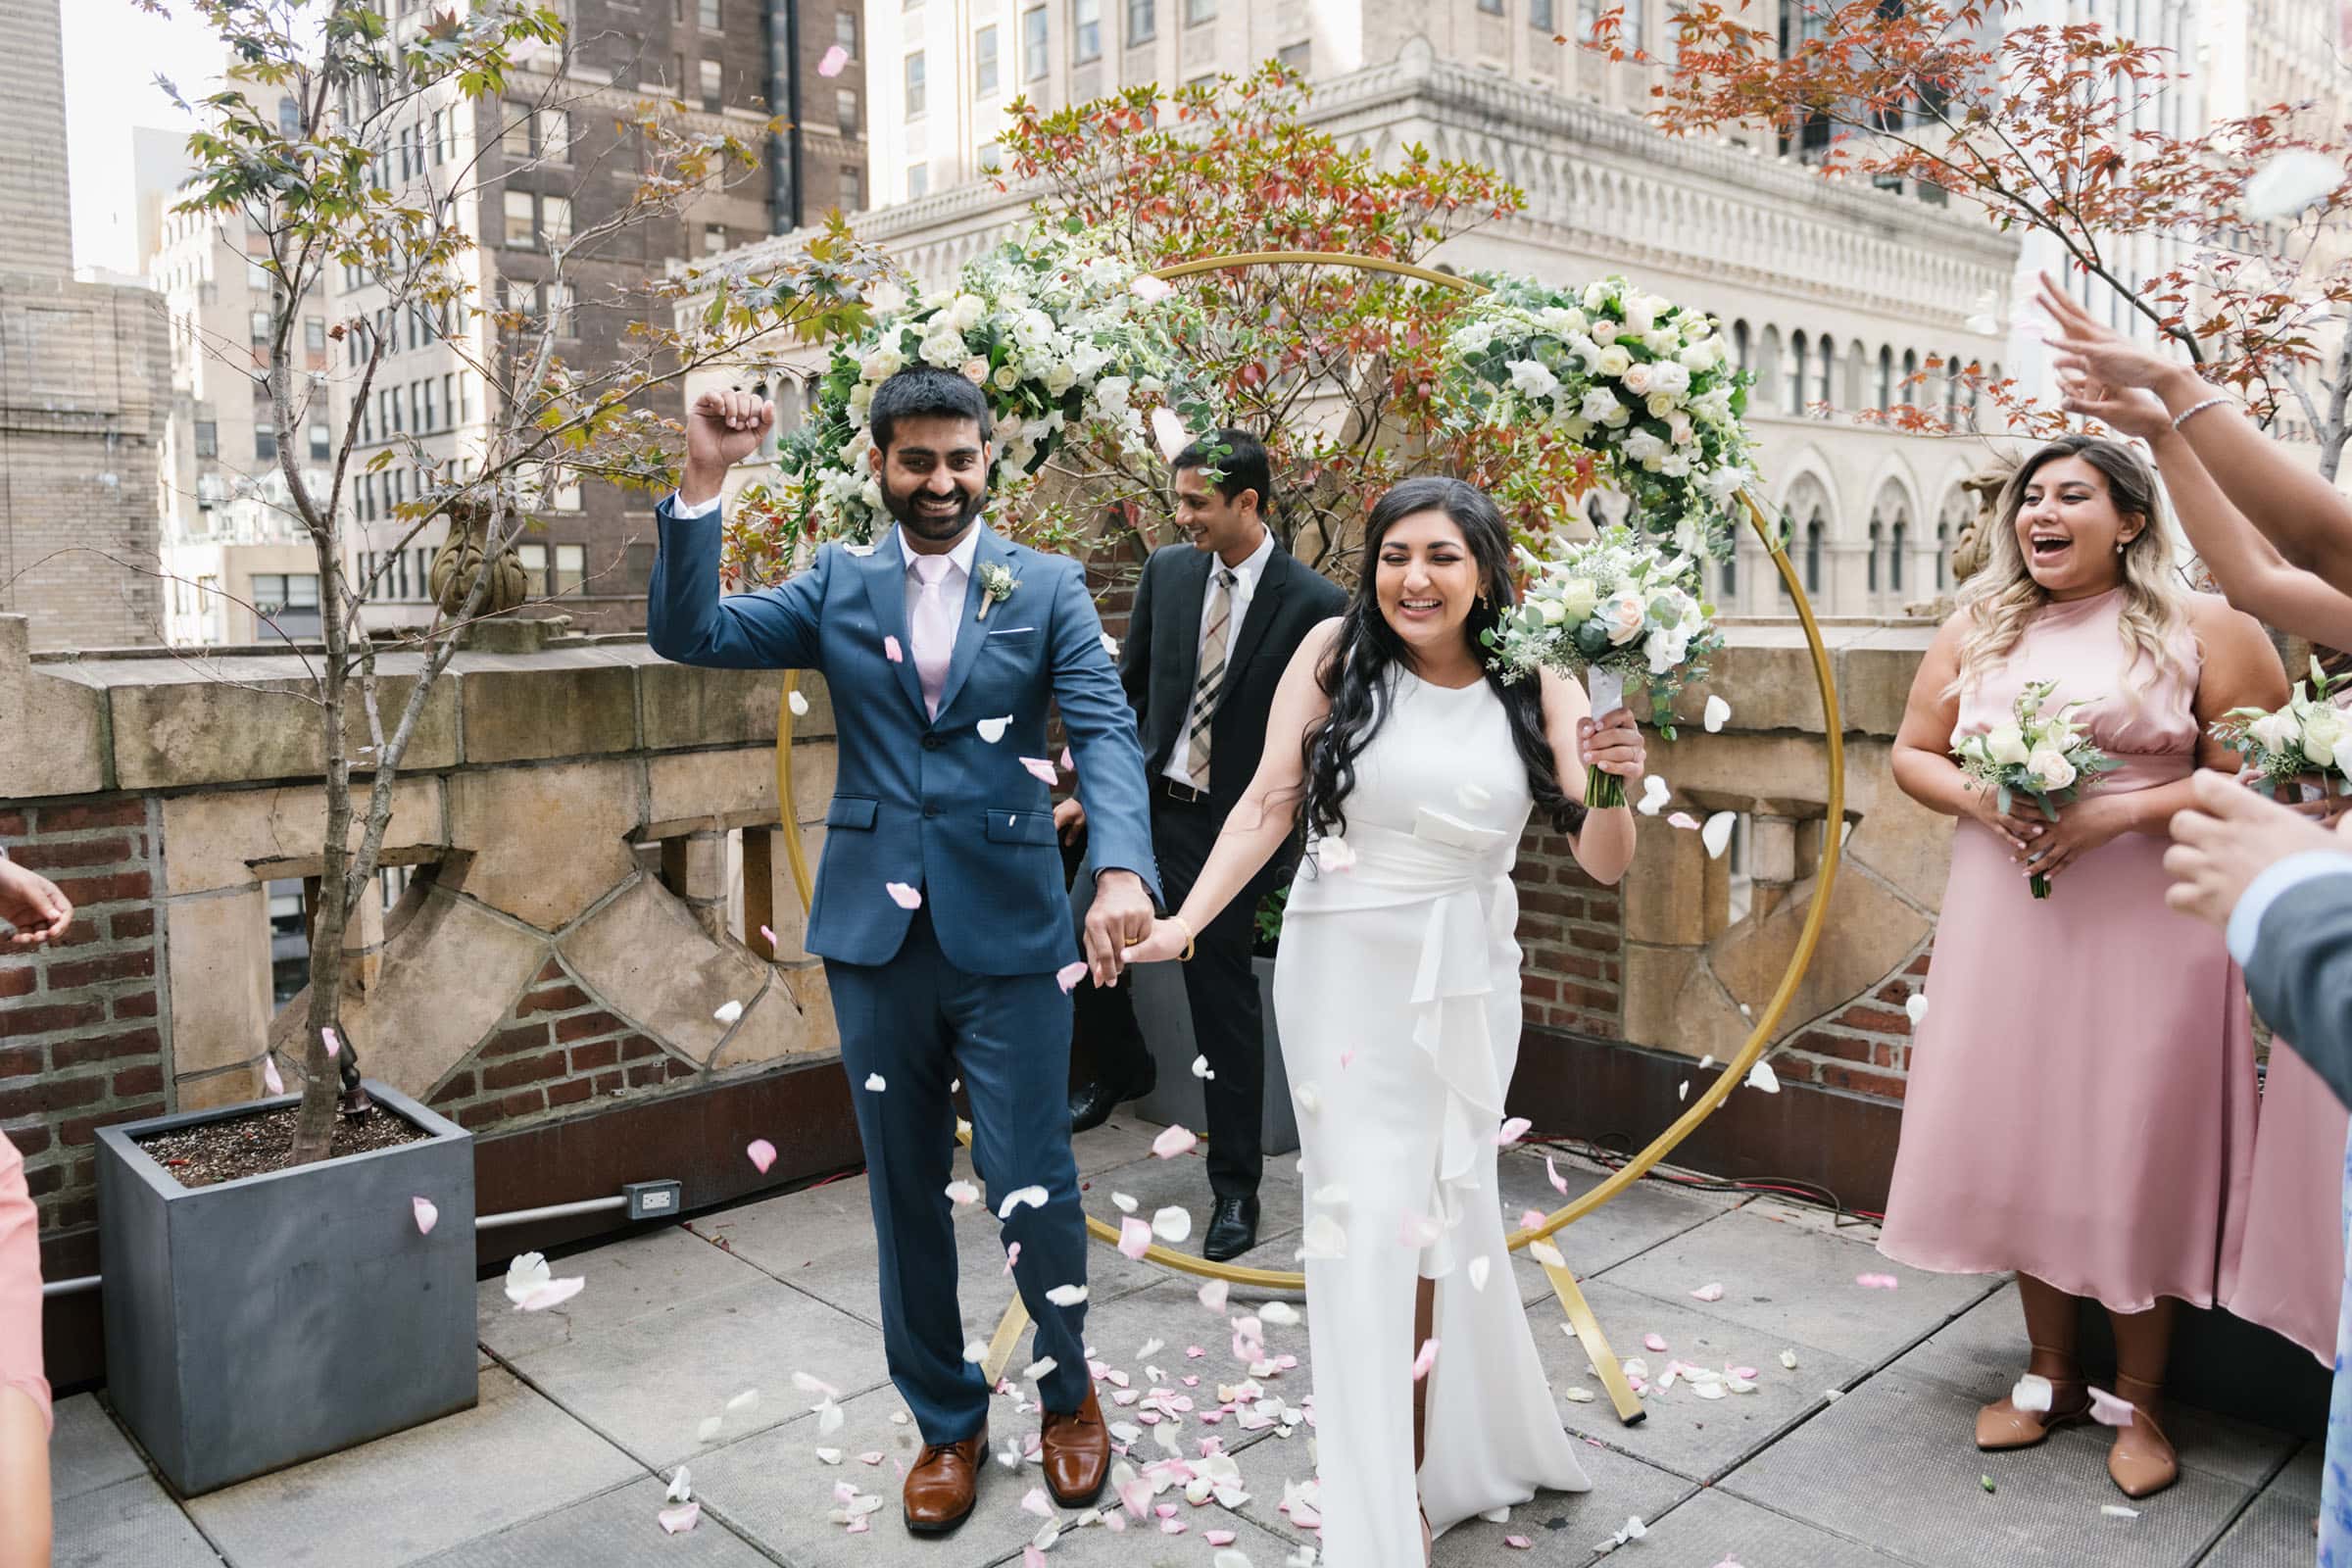 NYC Micro Wedding Photography & Officiant Packages | Everly Studios